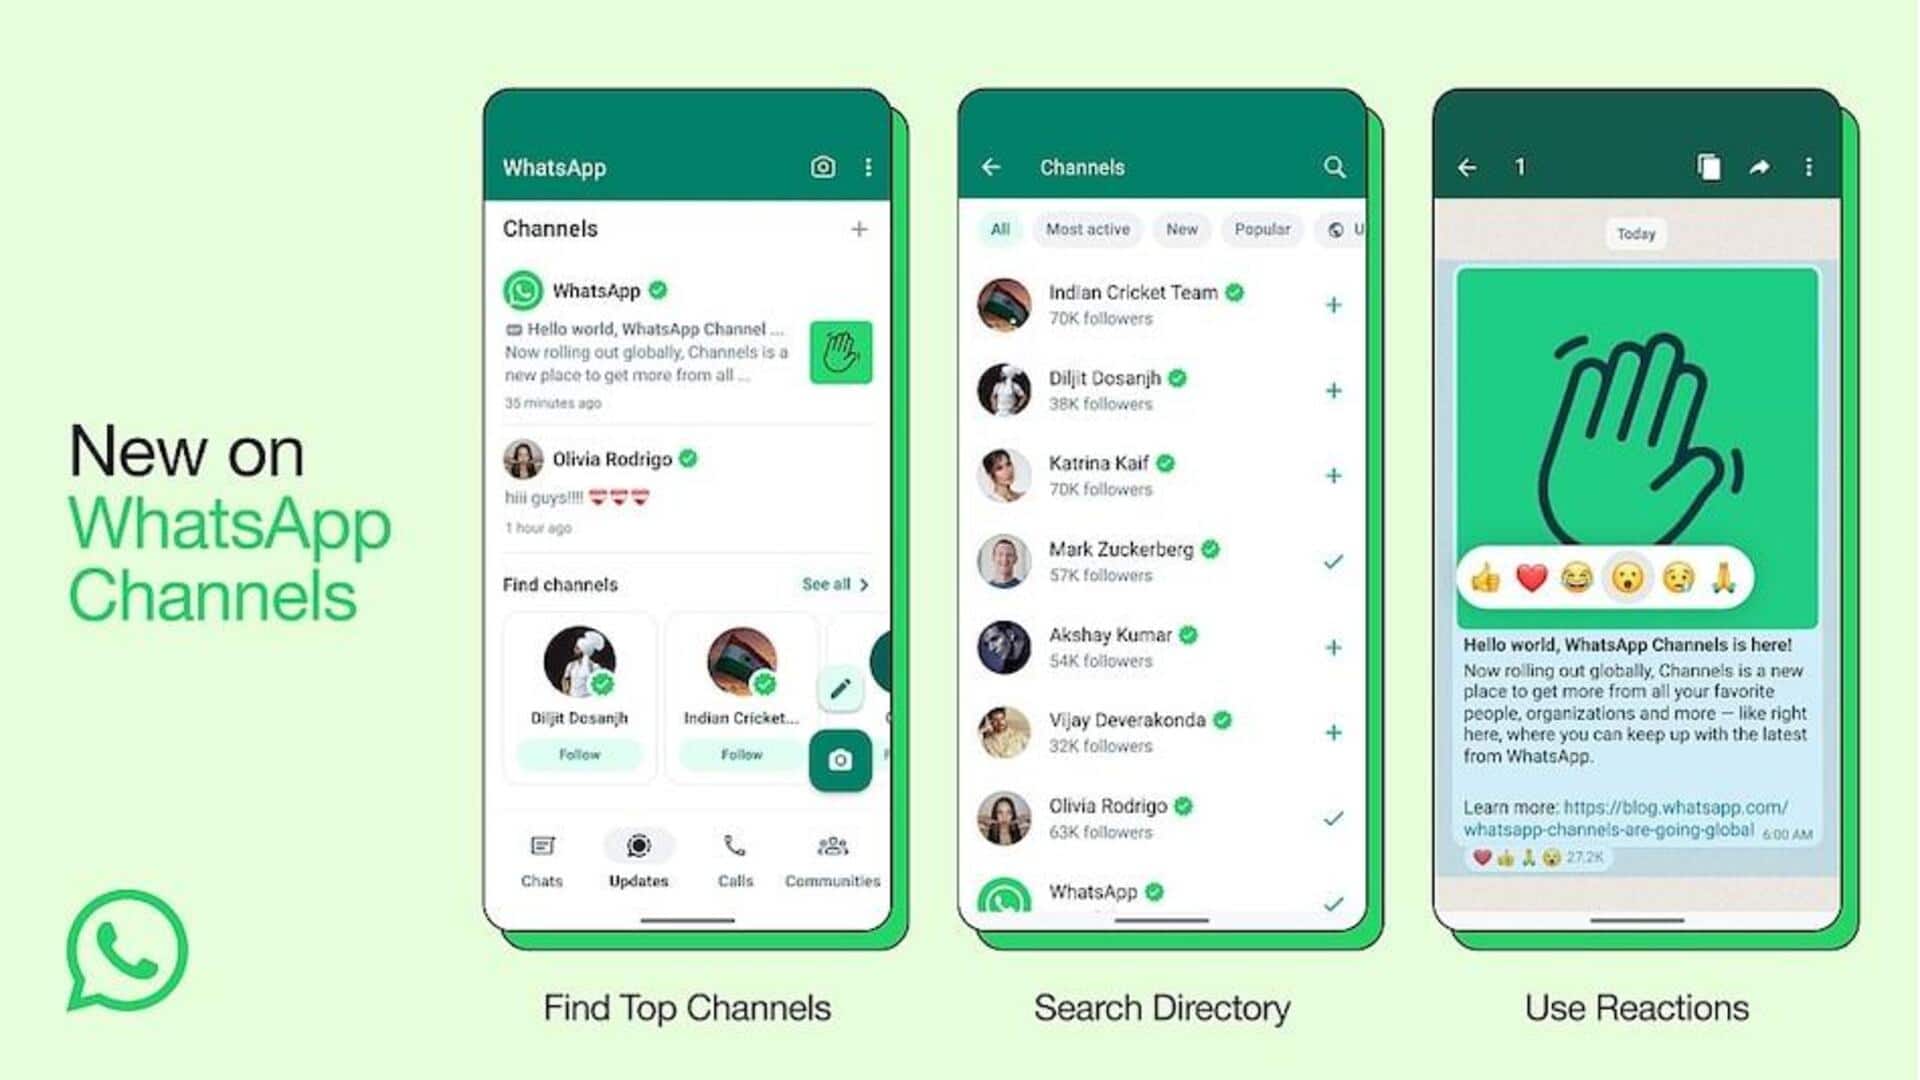 WhatsApp Channels go official in 150 countries including India